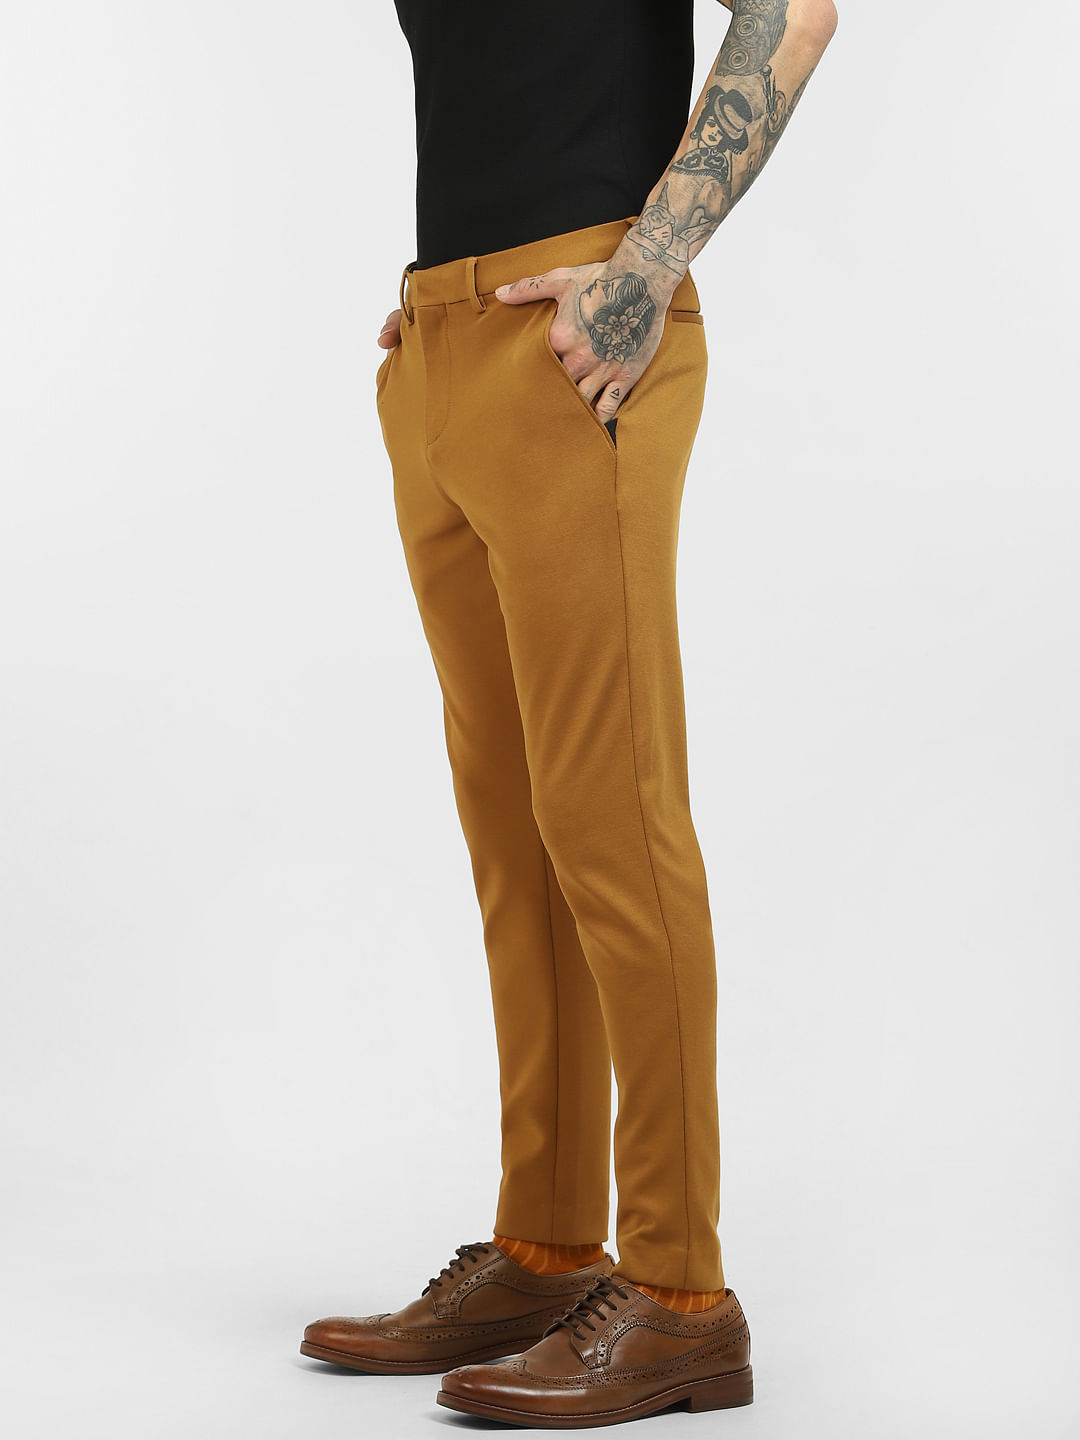 Wide & Flare Pants in the color brown for Men on sale | FASHIOLA INDIA